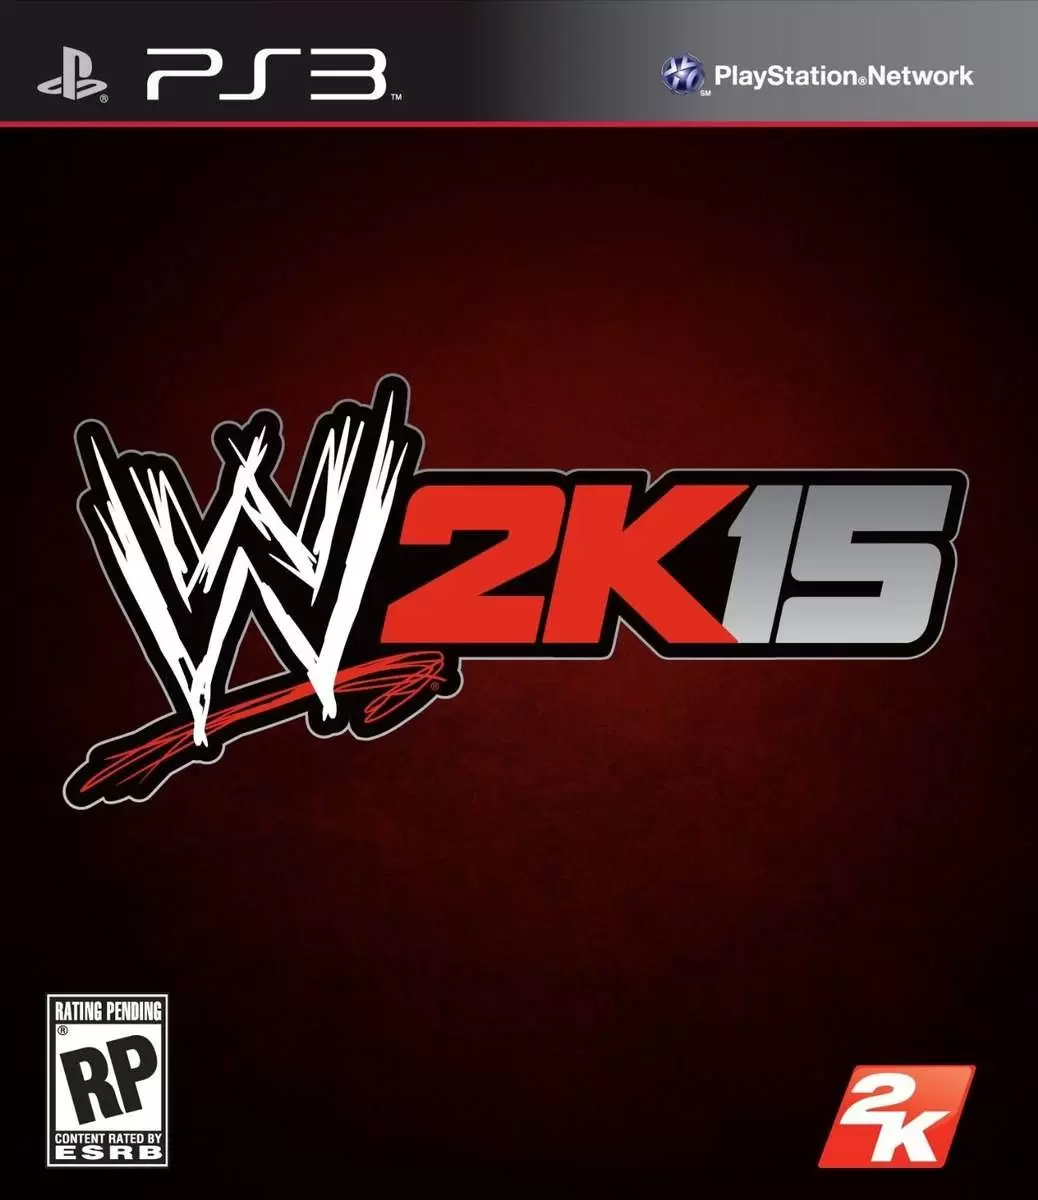 PS3 Games - WWE 2K15